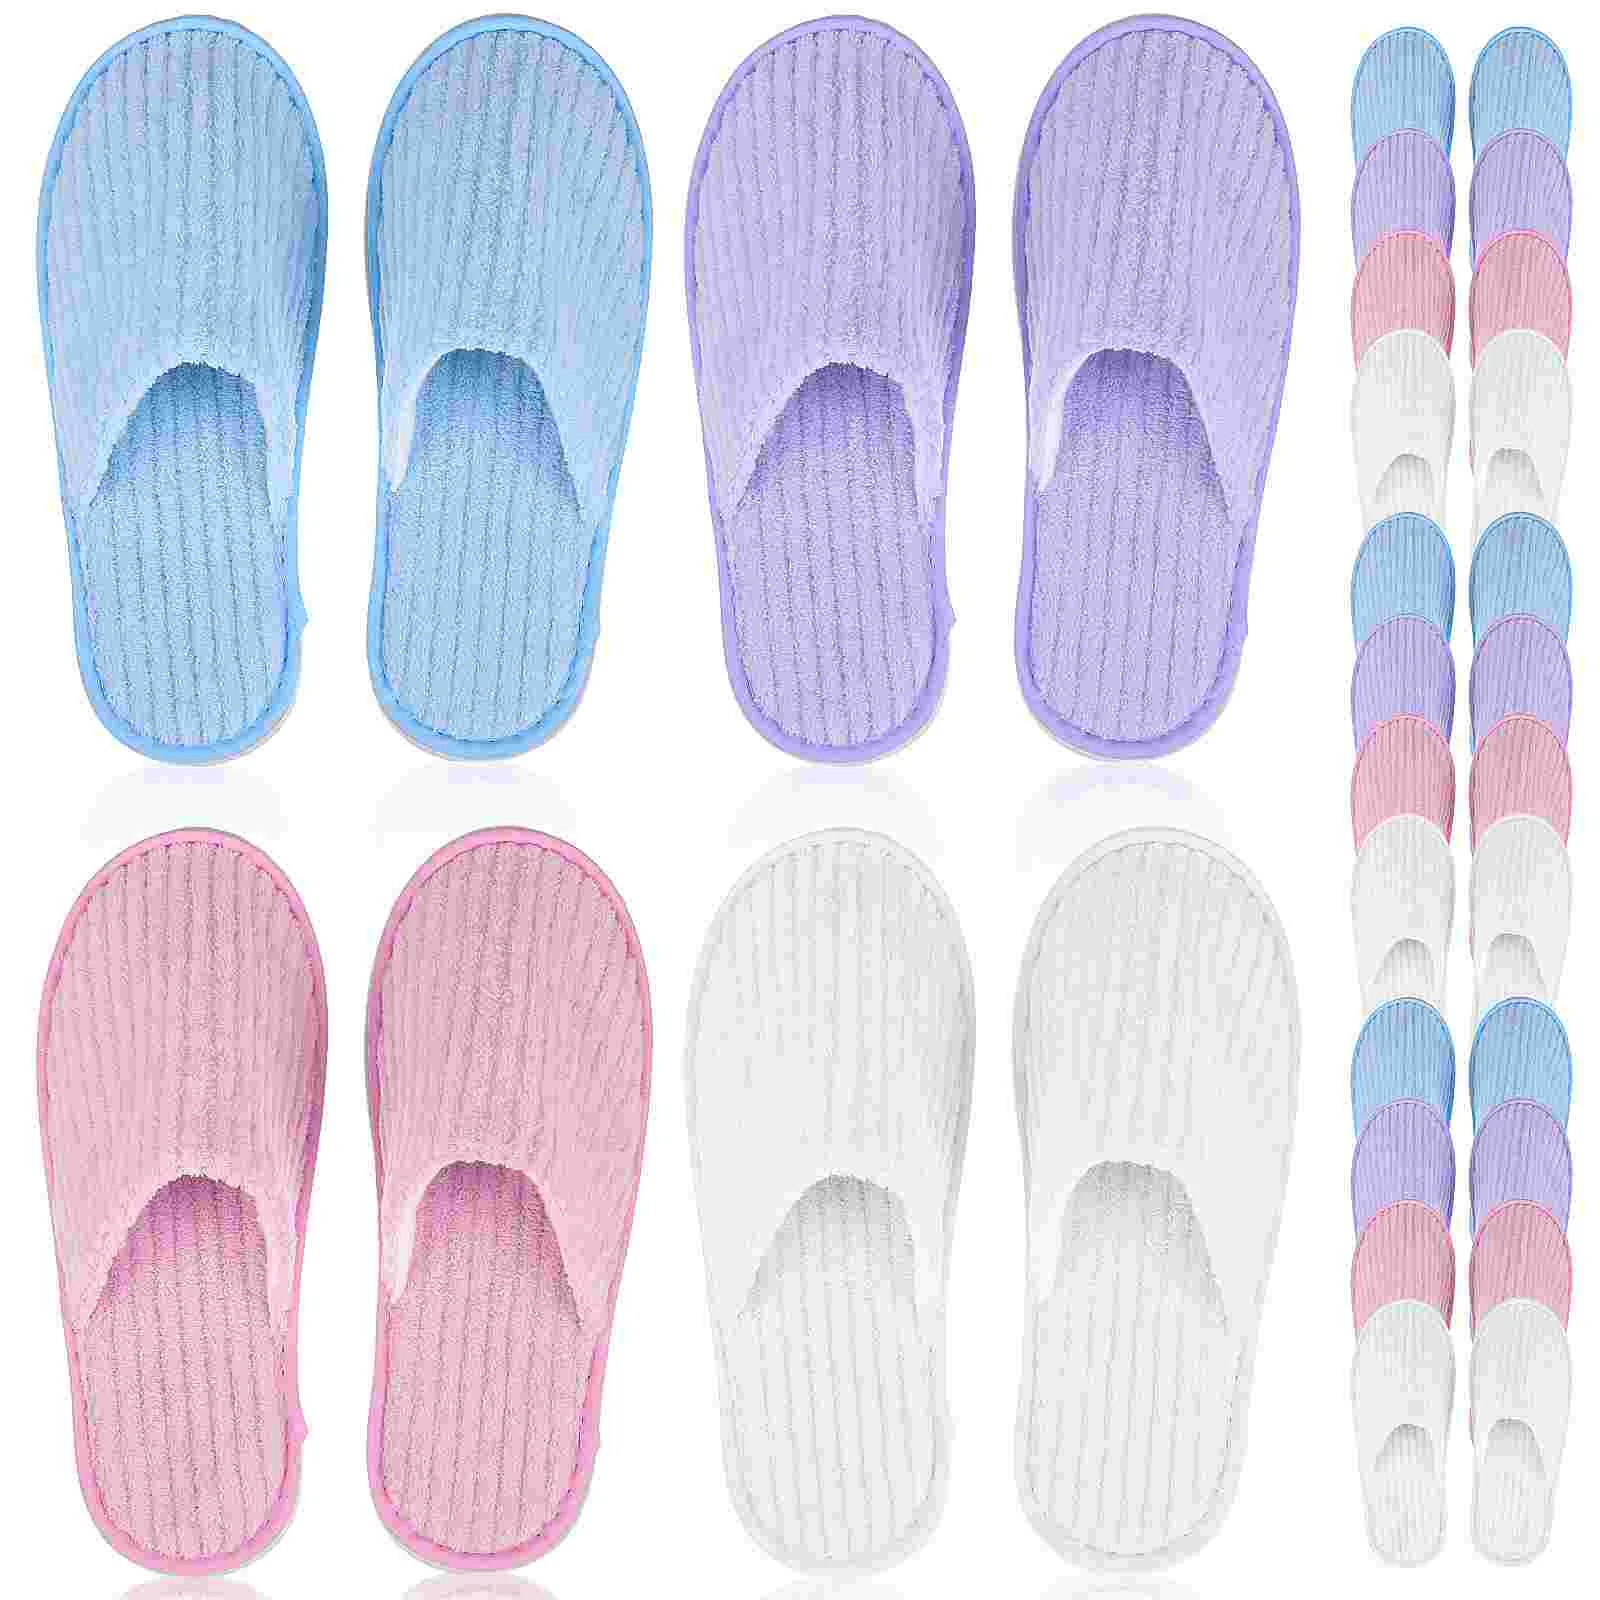 

12 Pairs House Shoes Guests Disposable Slippers Disposable House Slippers for Guest